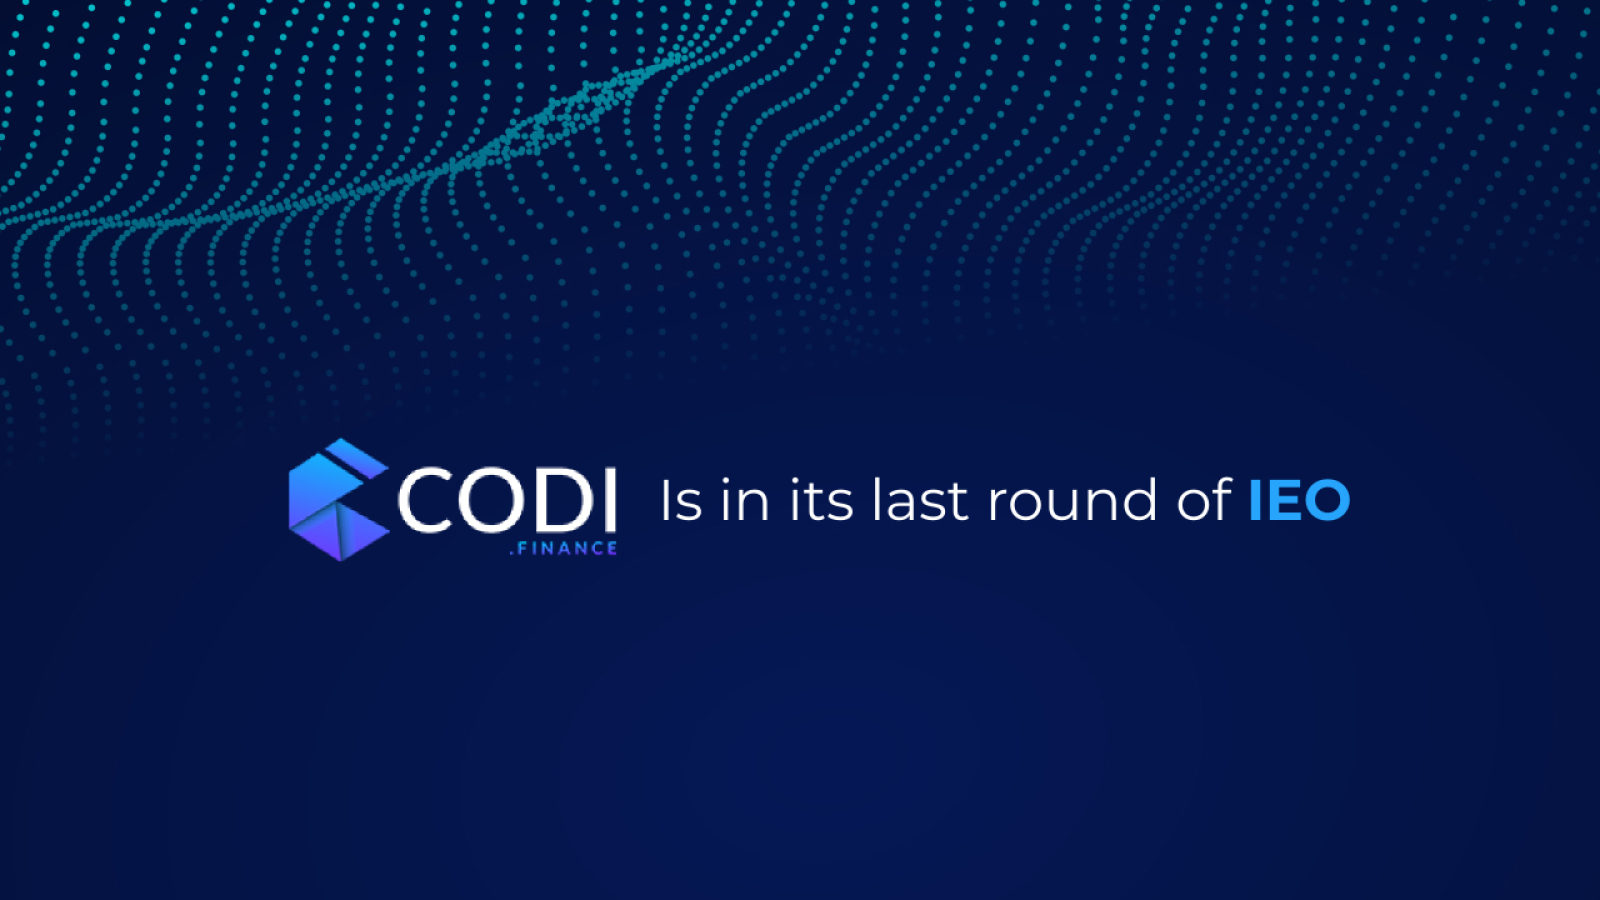 CODI Finance Announces Third Round Of IEO And CEX Exchange Listing